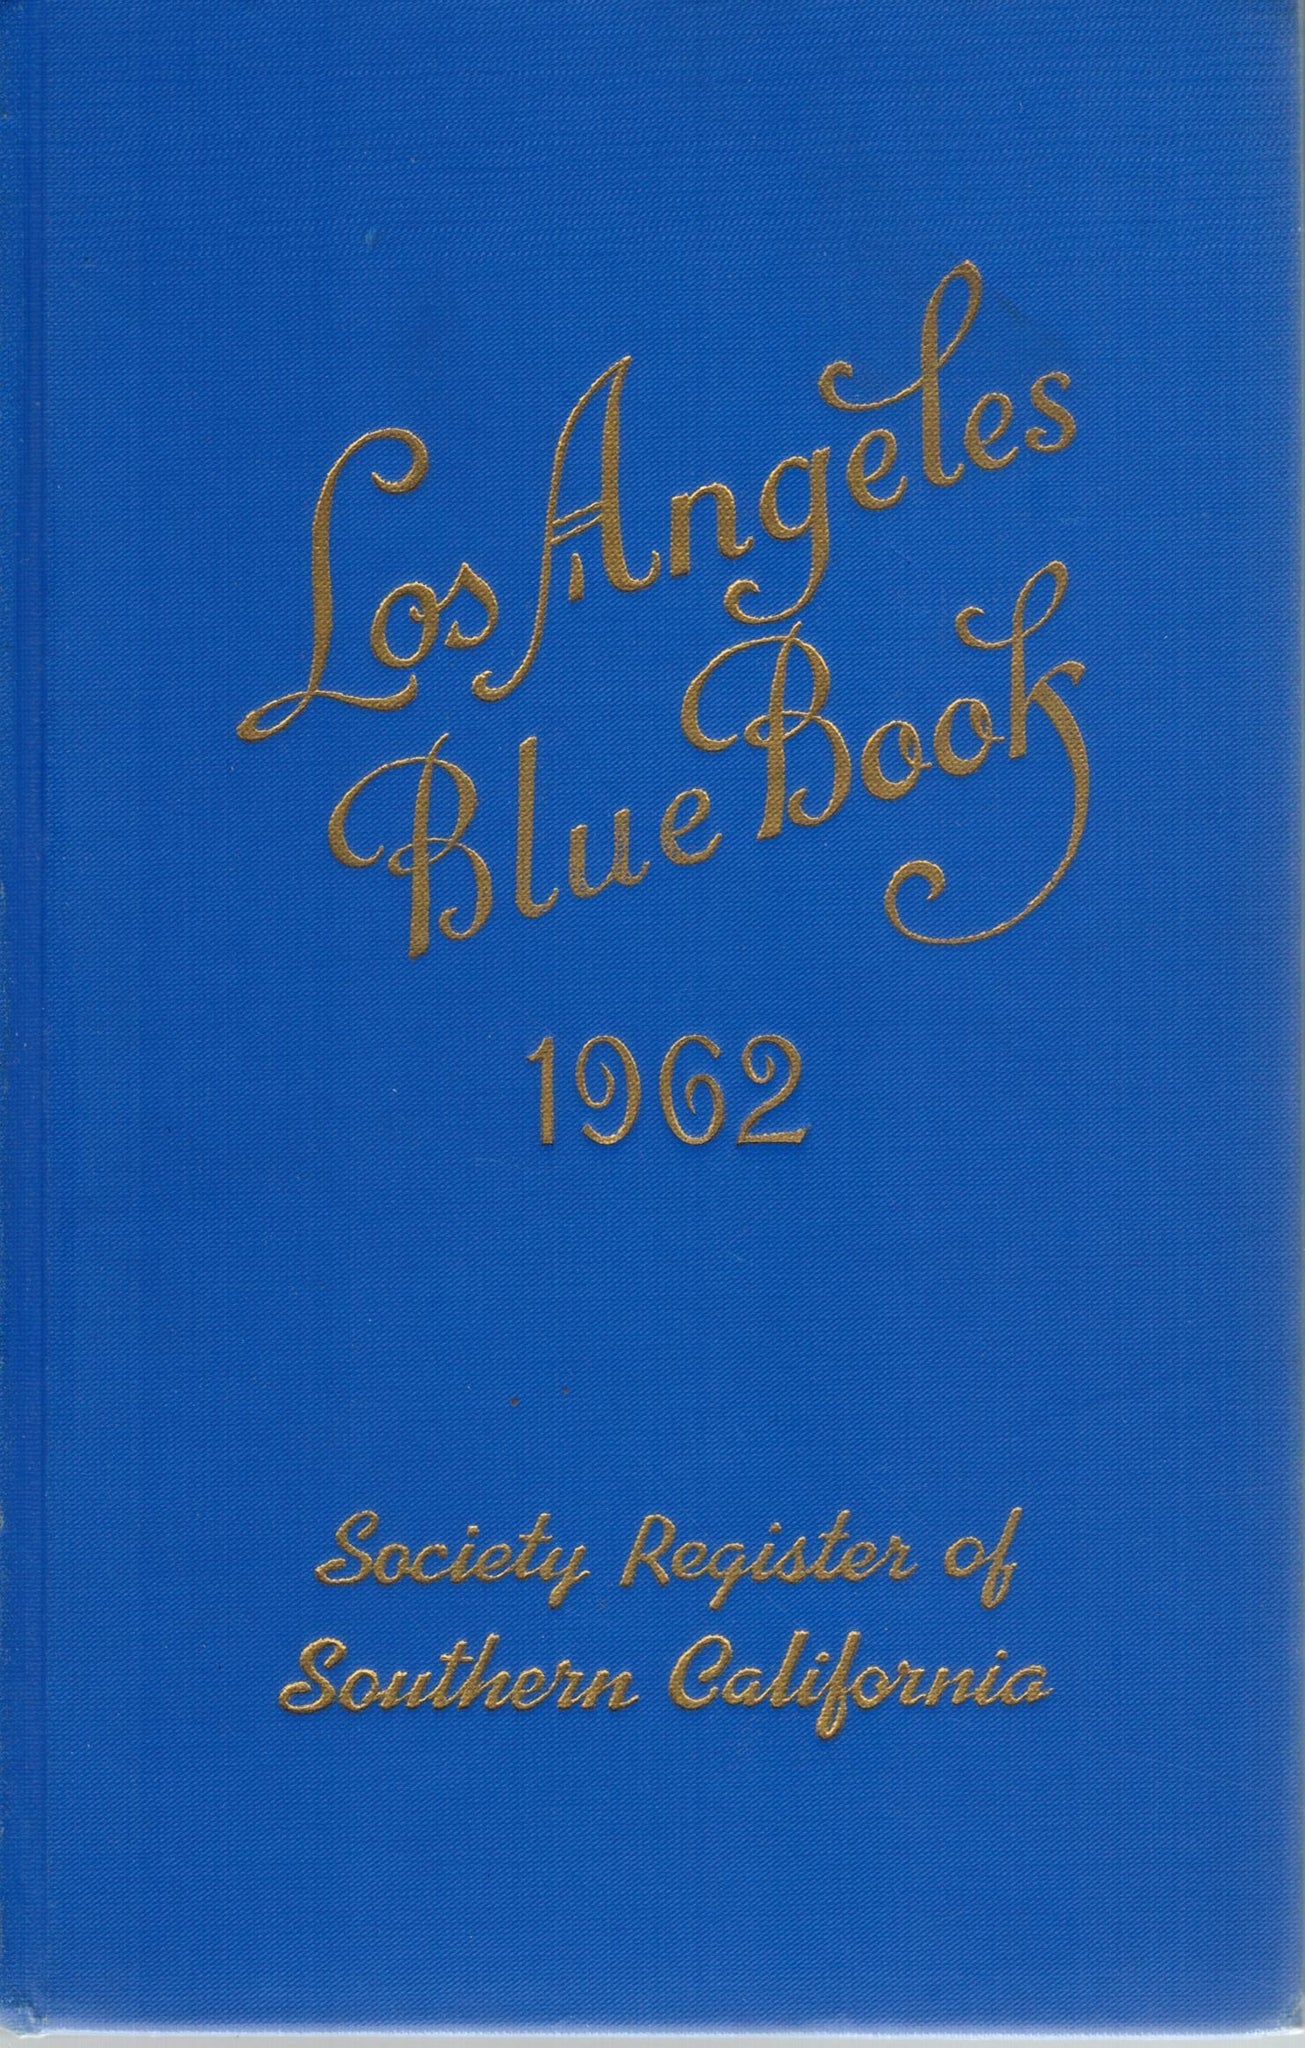 LOS ANGELES BLUE BOOK  1962 Society Register of Southern California - books-new